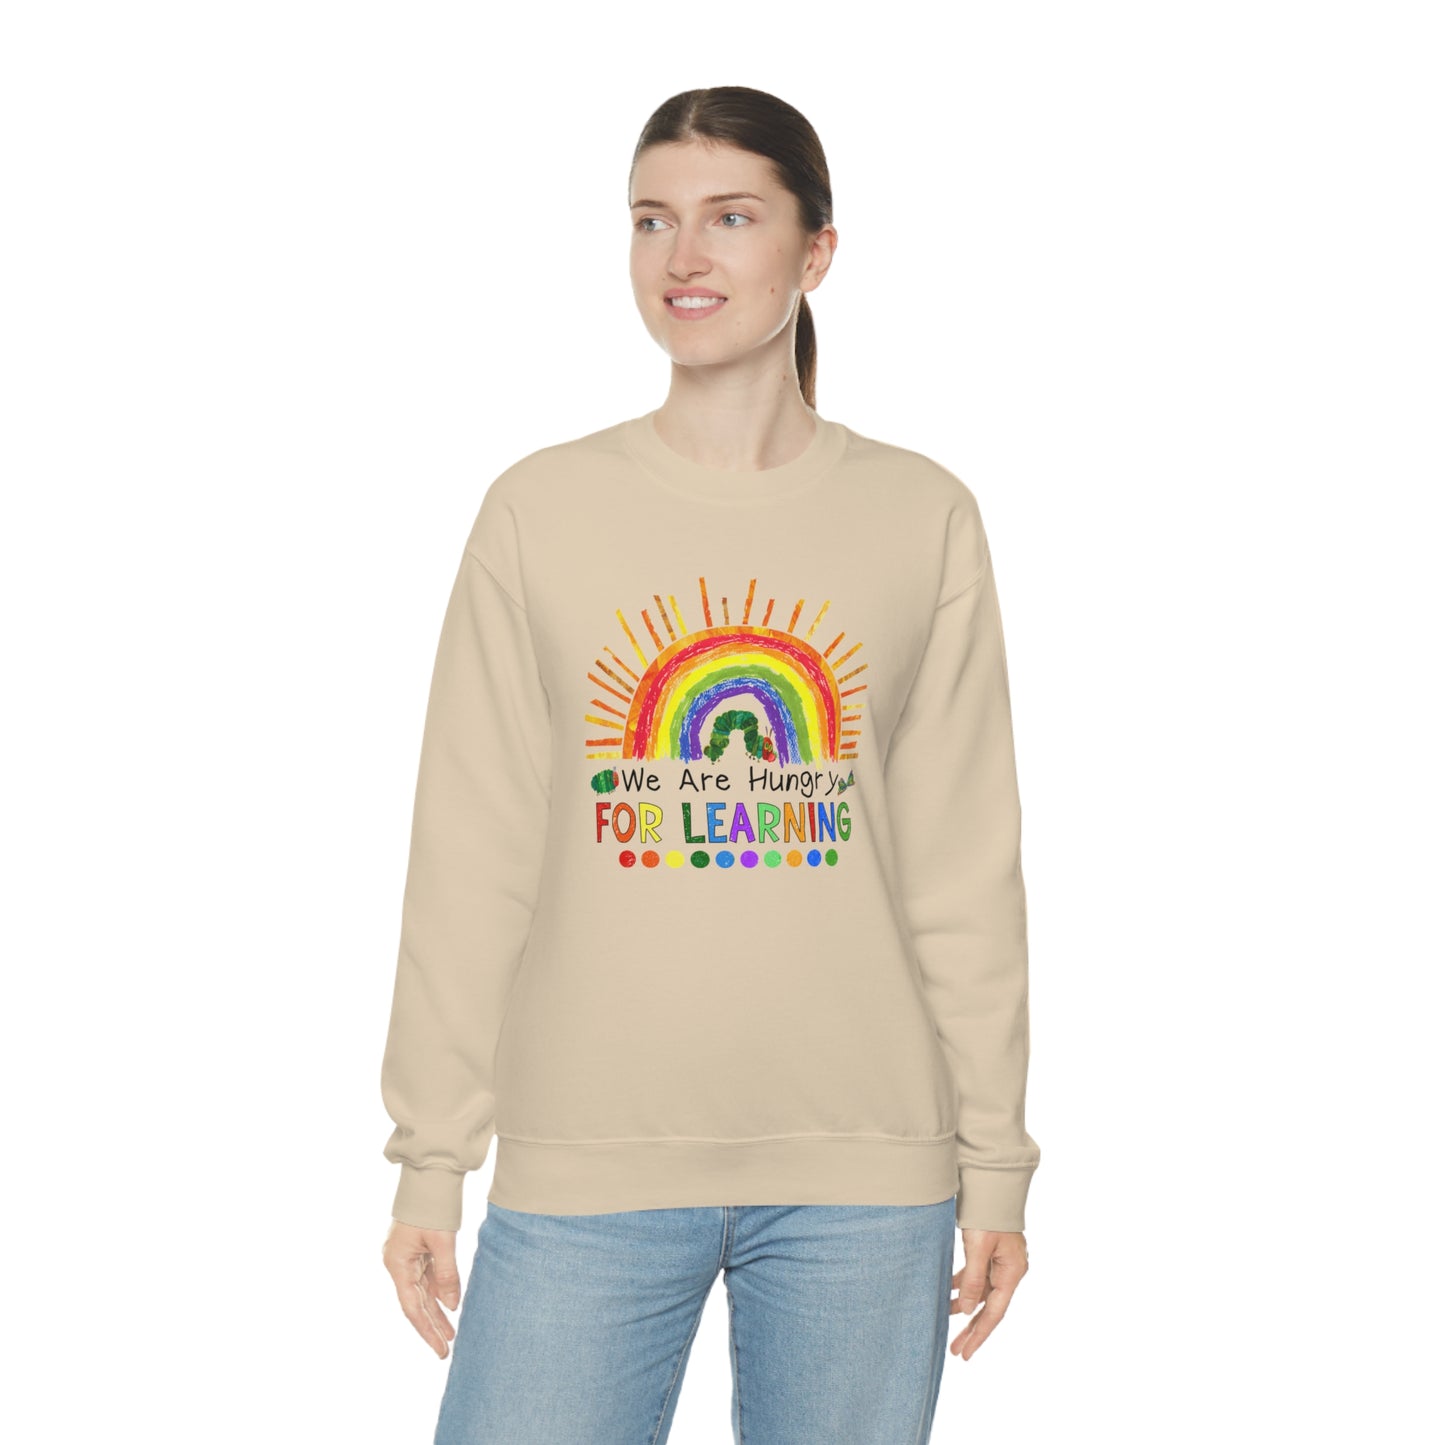 Hungry for Learning Sweatshirt